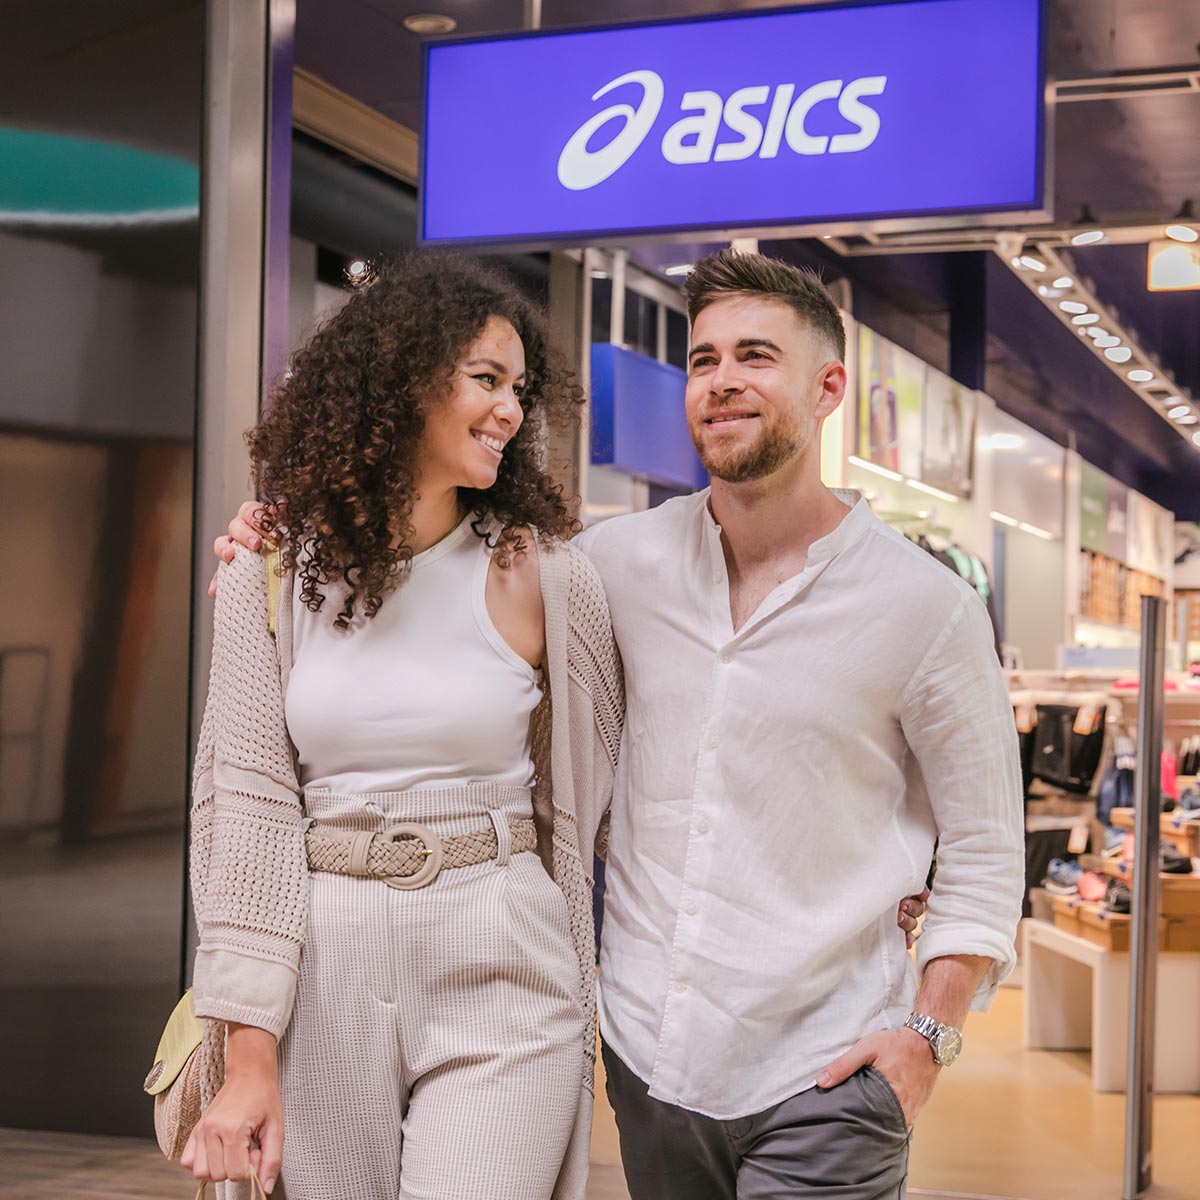 ASICS | PROMO - The Outlet Stores Alicante